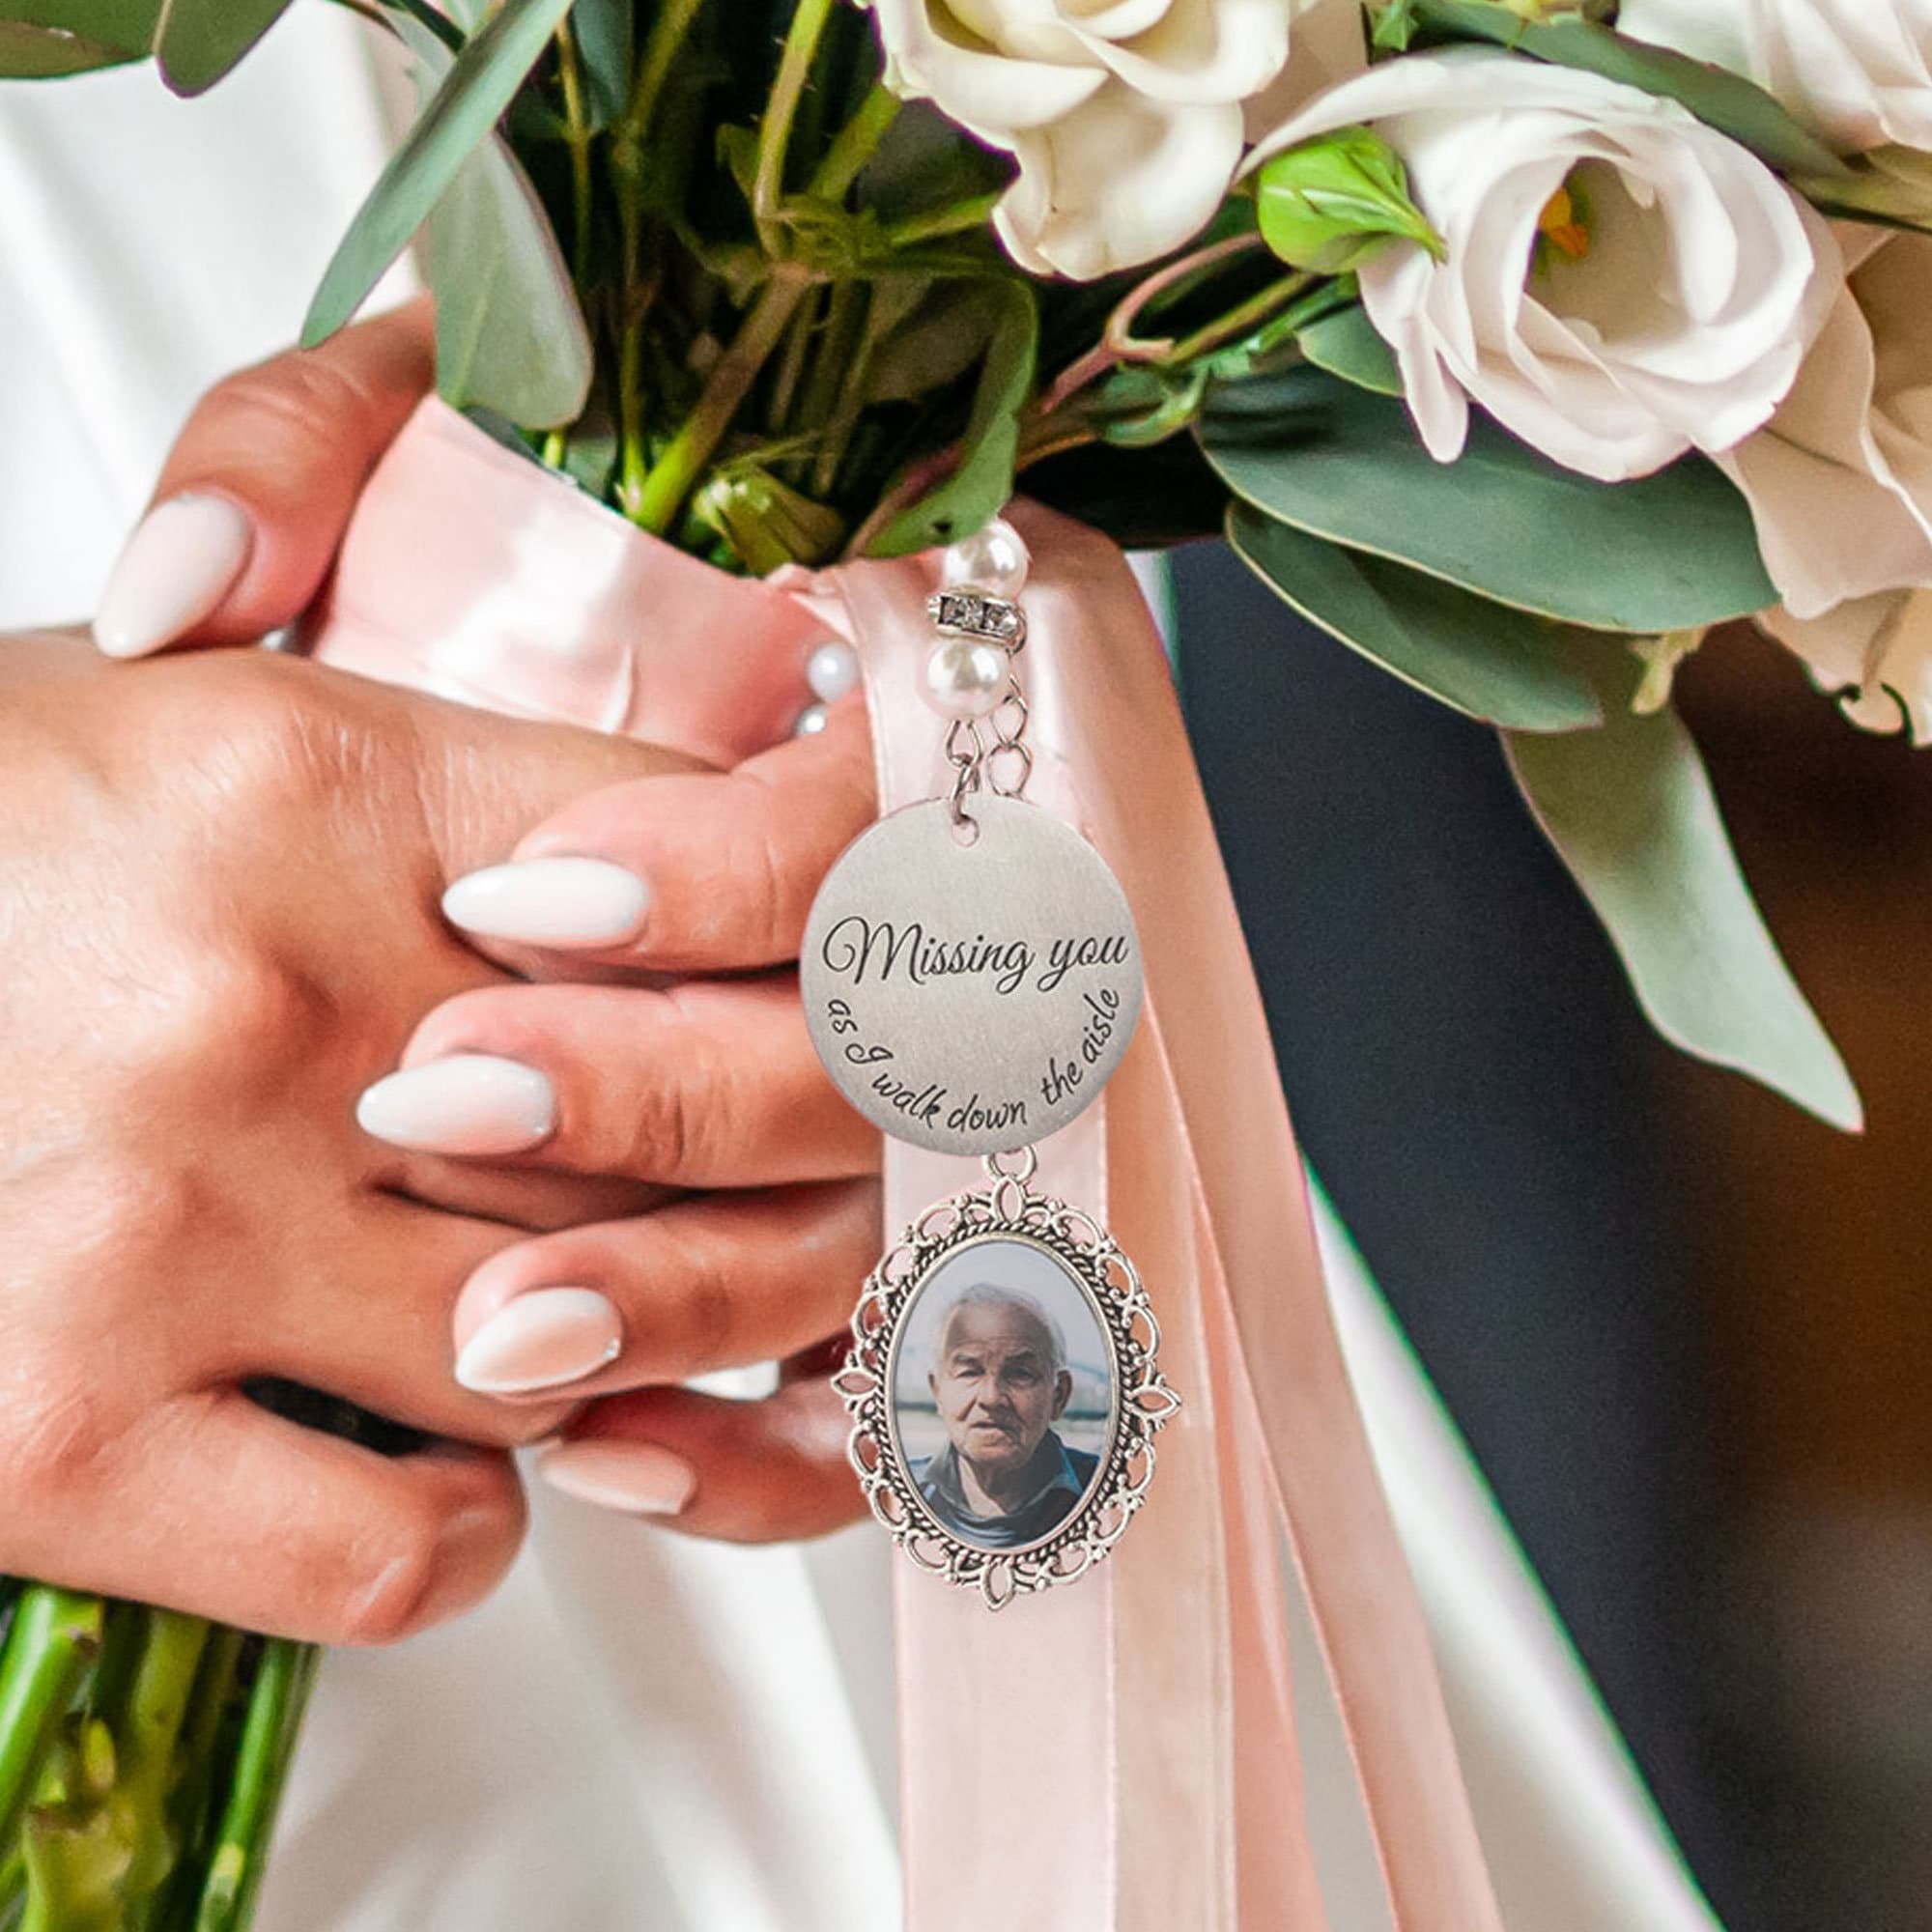 SUPERFINDINGS 2pcs Wedding Bouquet Charm Oval Bridal Wedding Bouquet Photo Charms 316 Stainless Steel Locket Pendants Decoration